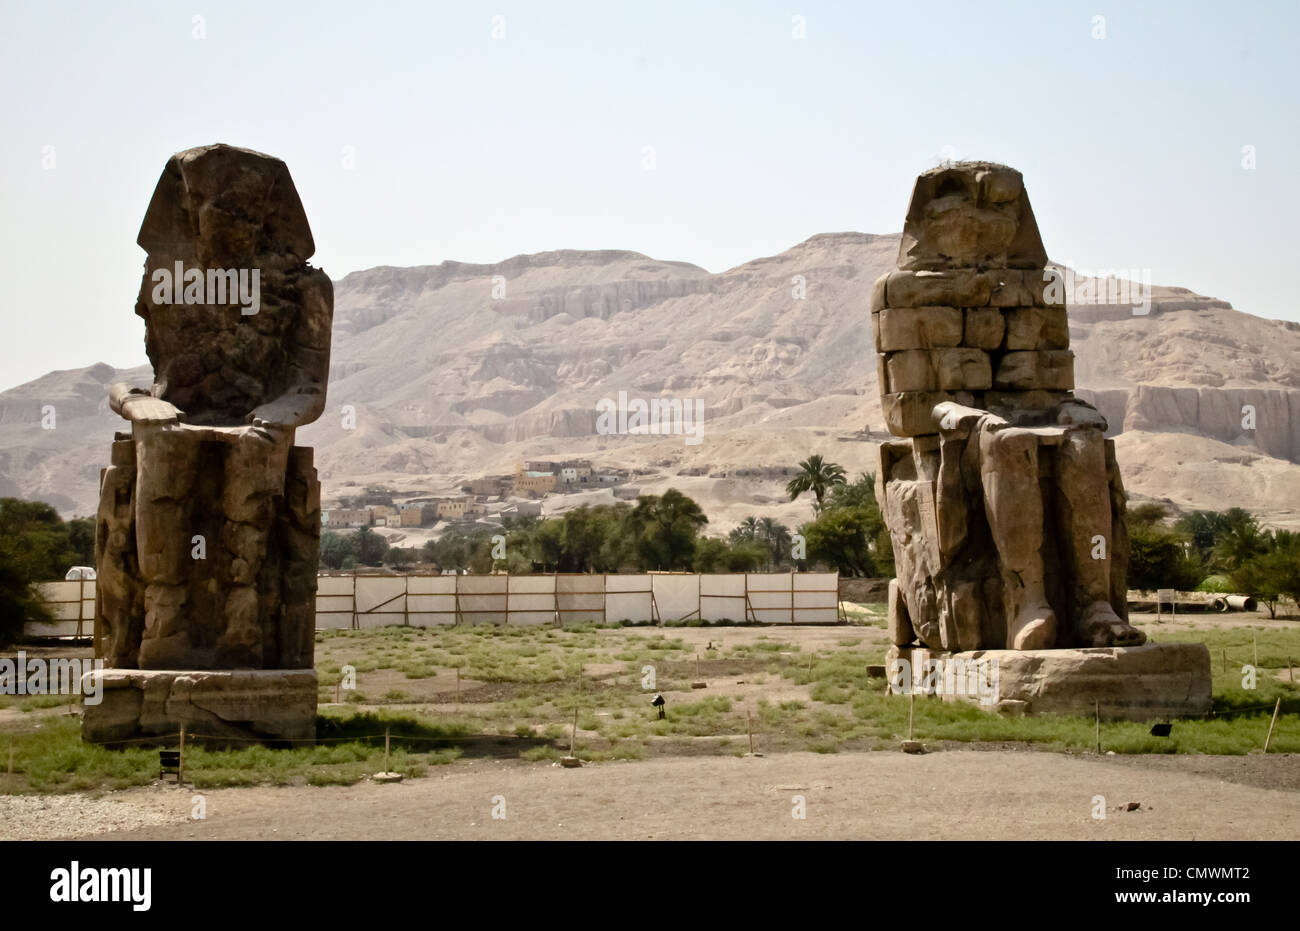 The giants of Memnon sites near the sacred temple of Luxor in Egypt Stock Photo